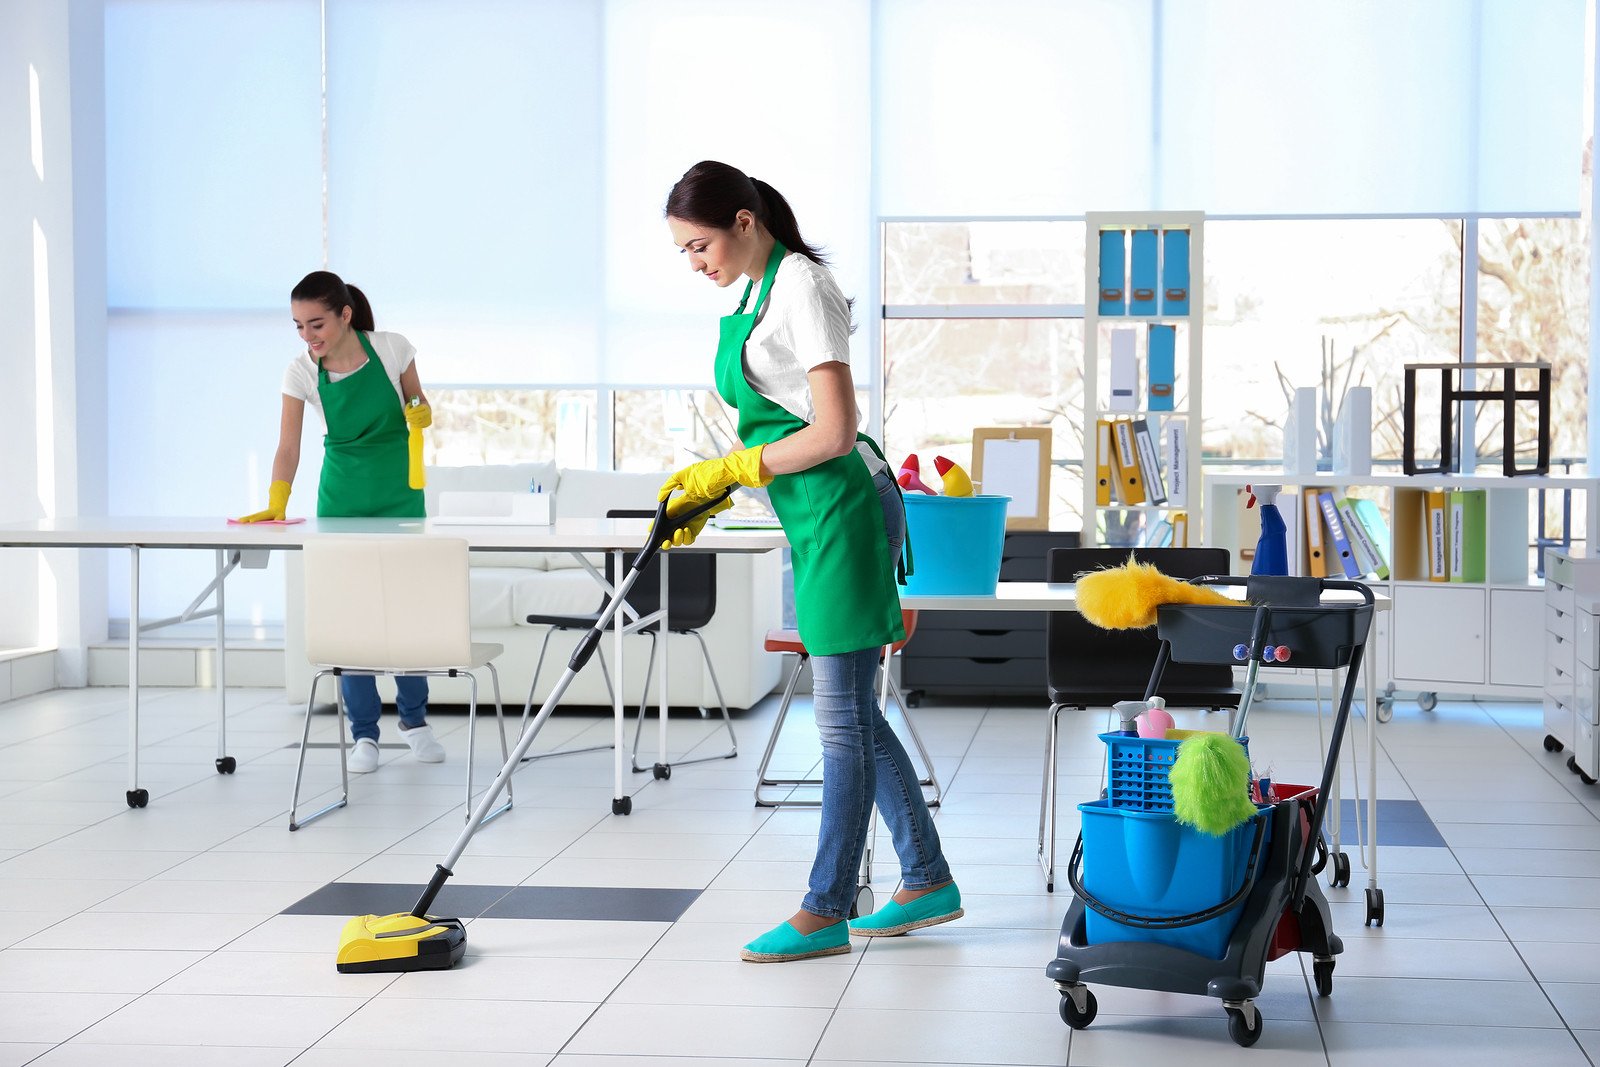 commercial-cleaners-cleaning.jpg